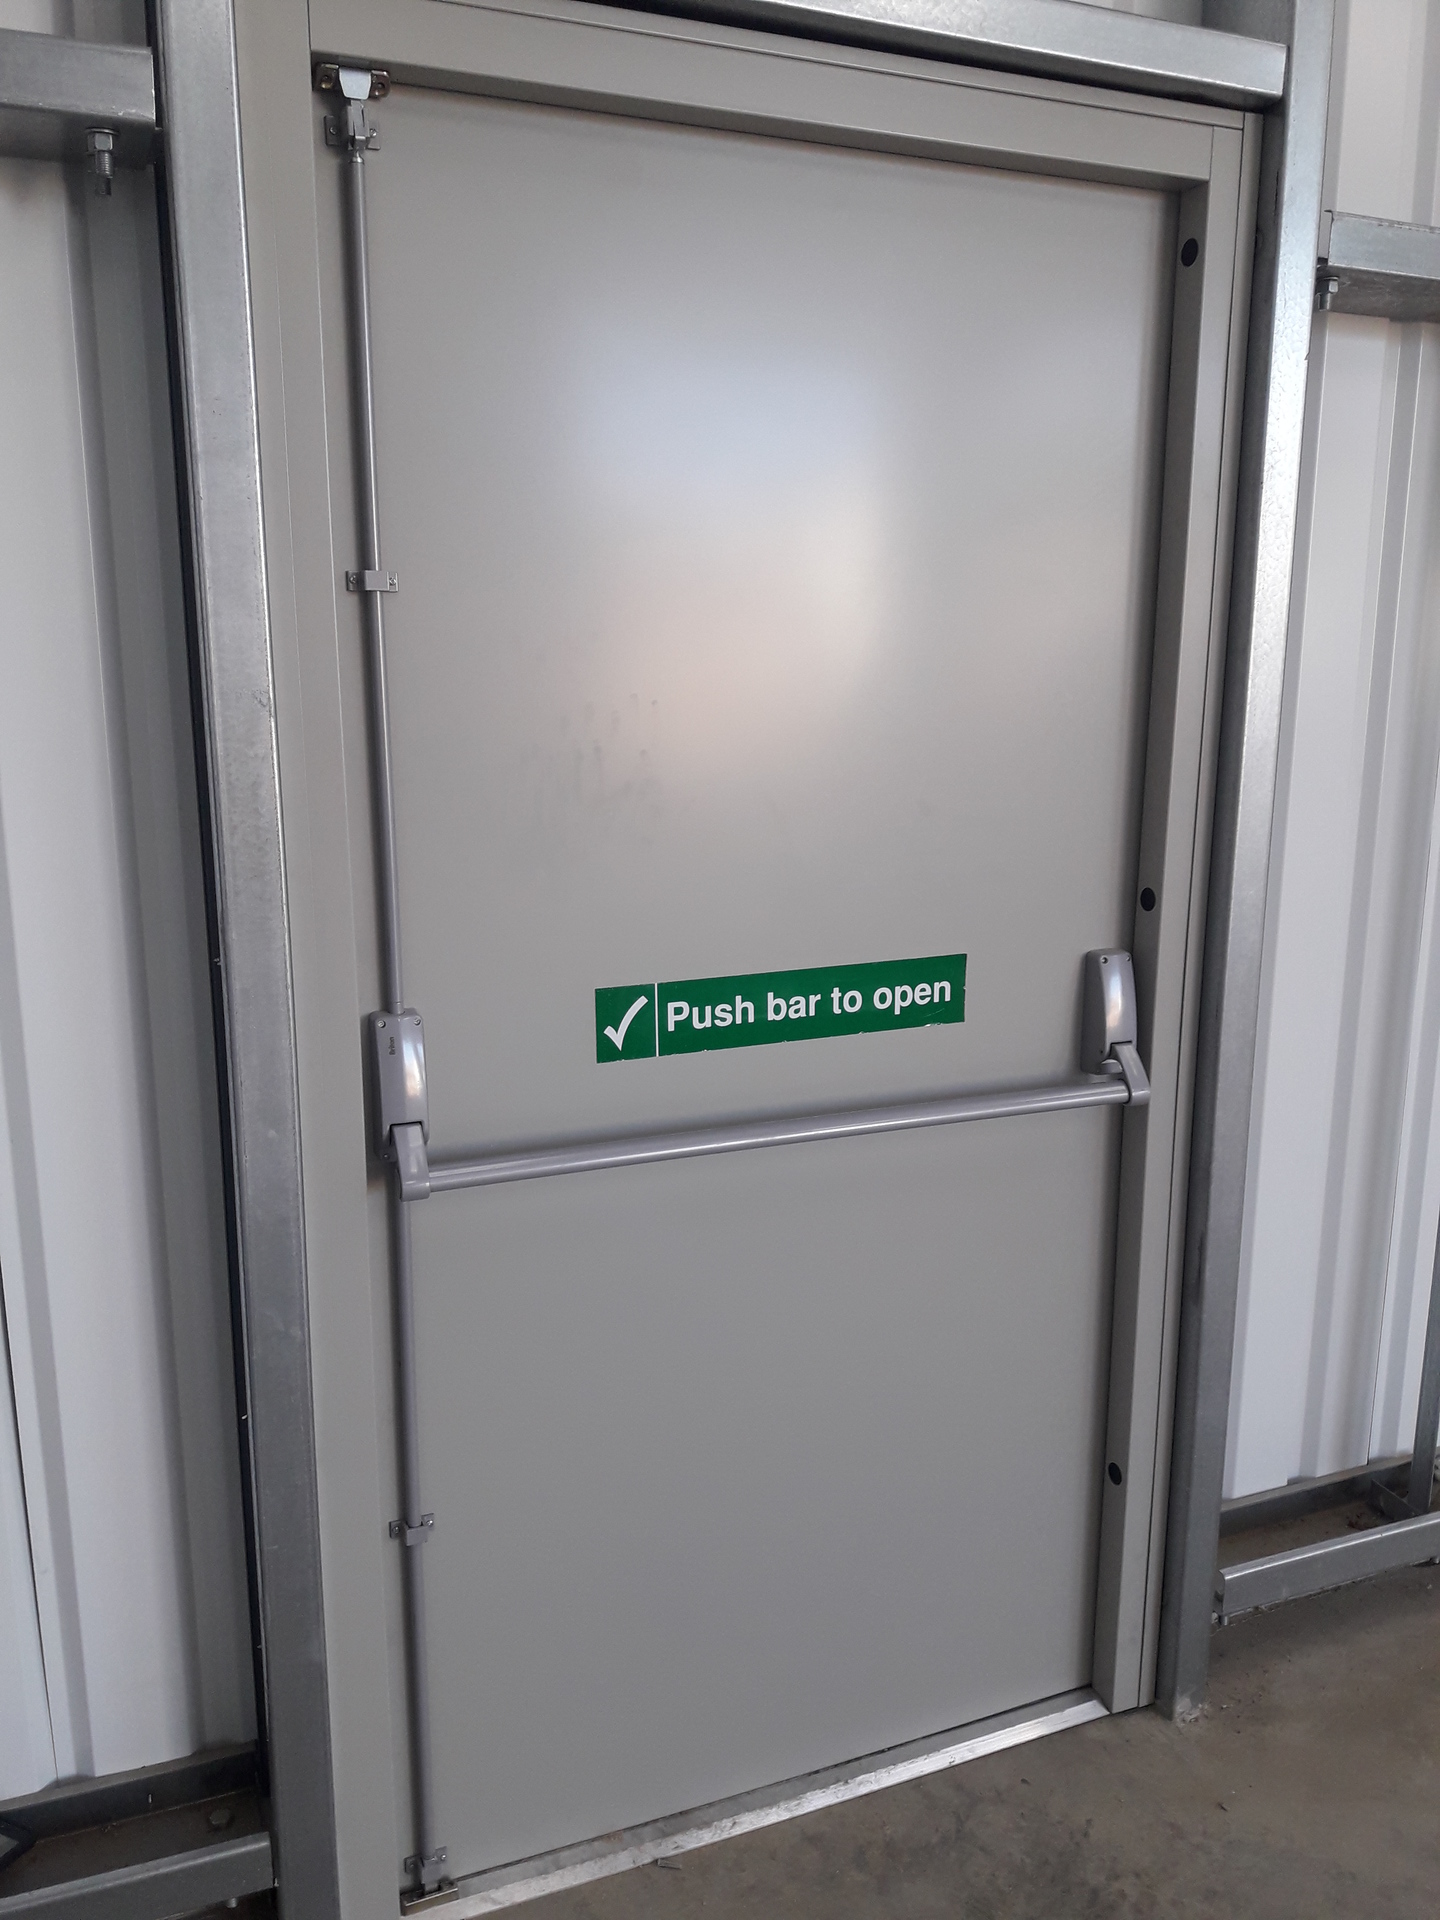 A fire exit door equipped with panic hardware